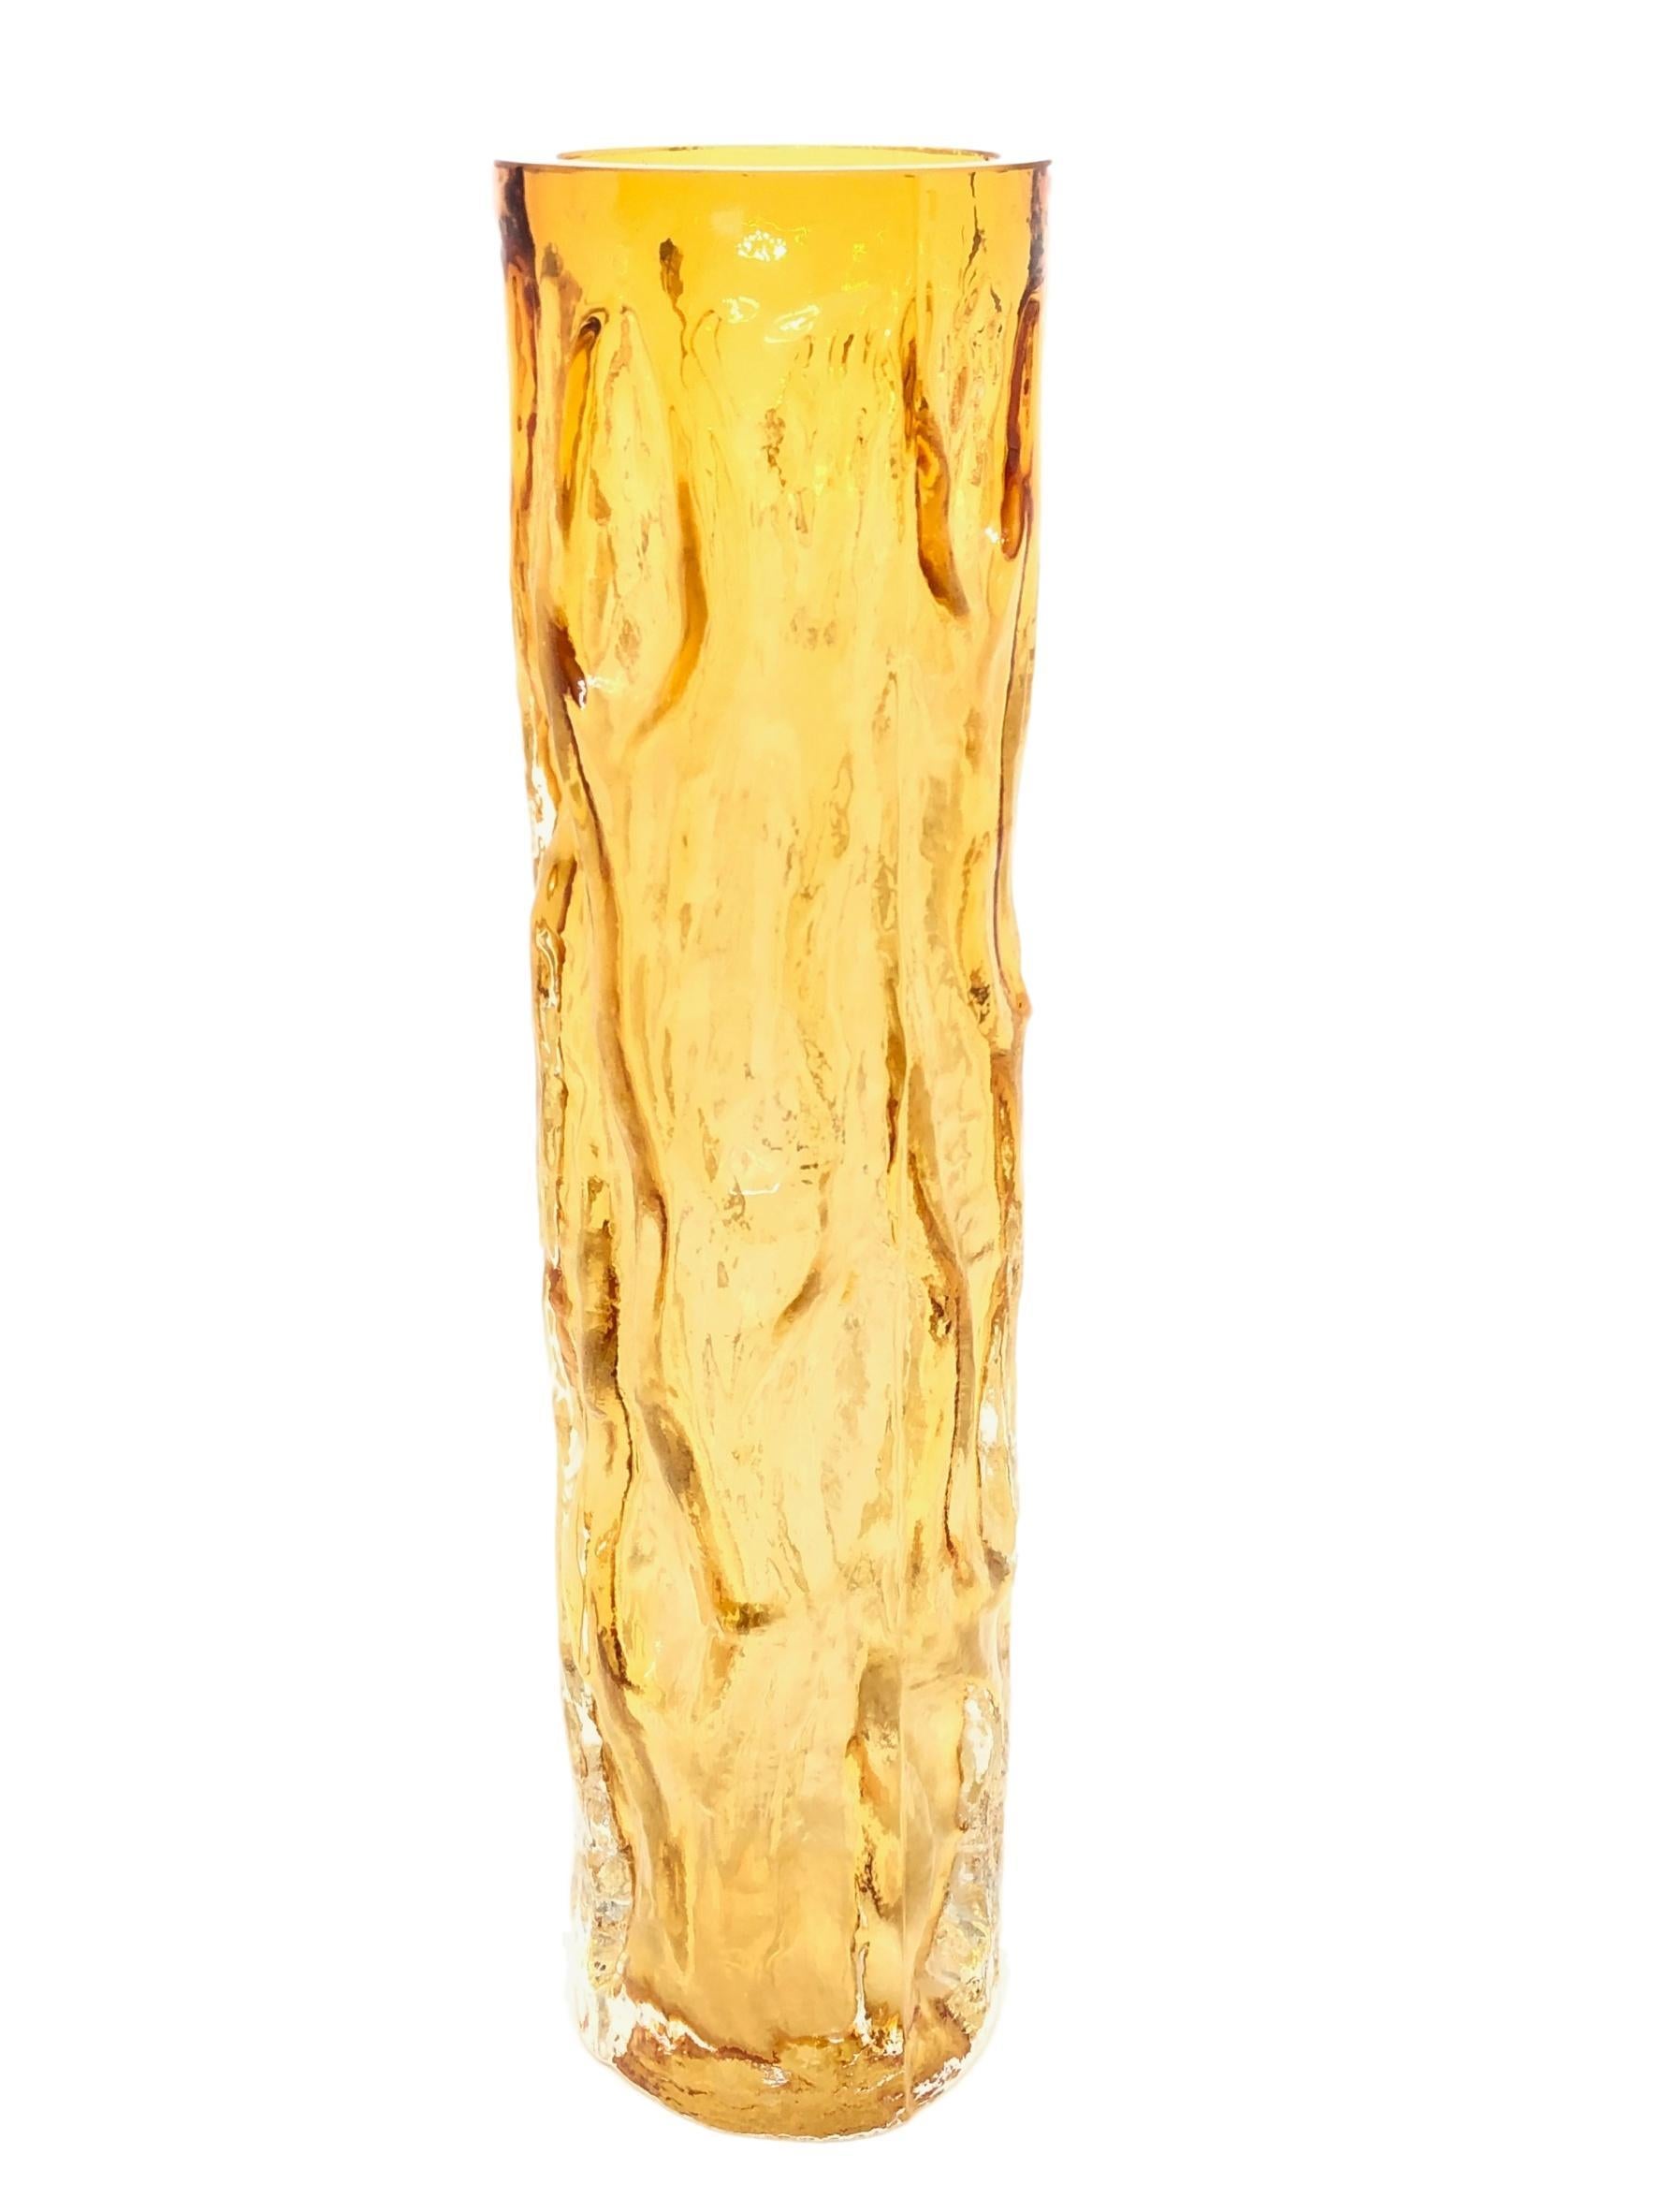 A vintage 1970s Ingrid glass vase from Germany. This hand blown vase comes in a stunning amber color and is decorated with relief wave design.